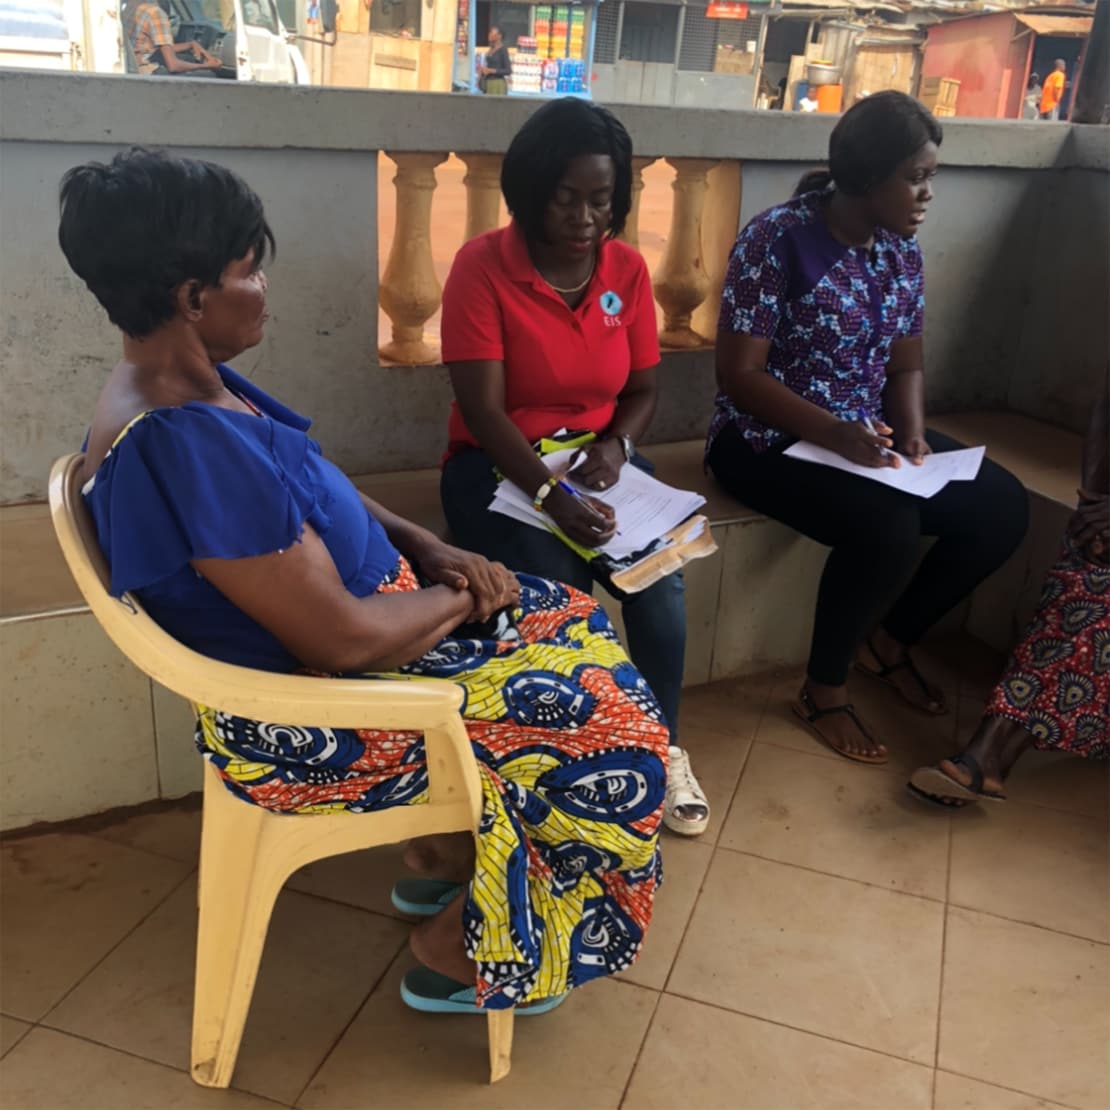 The project principal investigator, Dr. Christabel Ayepah, and a team member interview participants during a blood pressure screening in Ngesia, Ghana. Photo: Christabel Ayepah